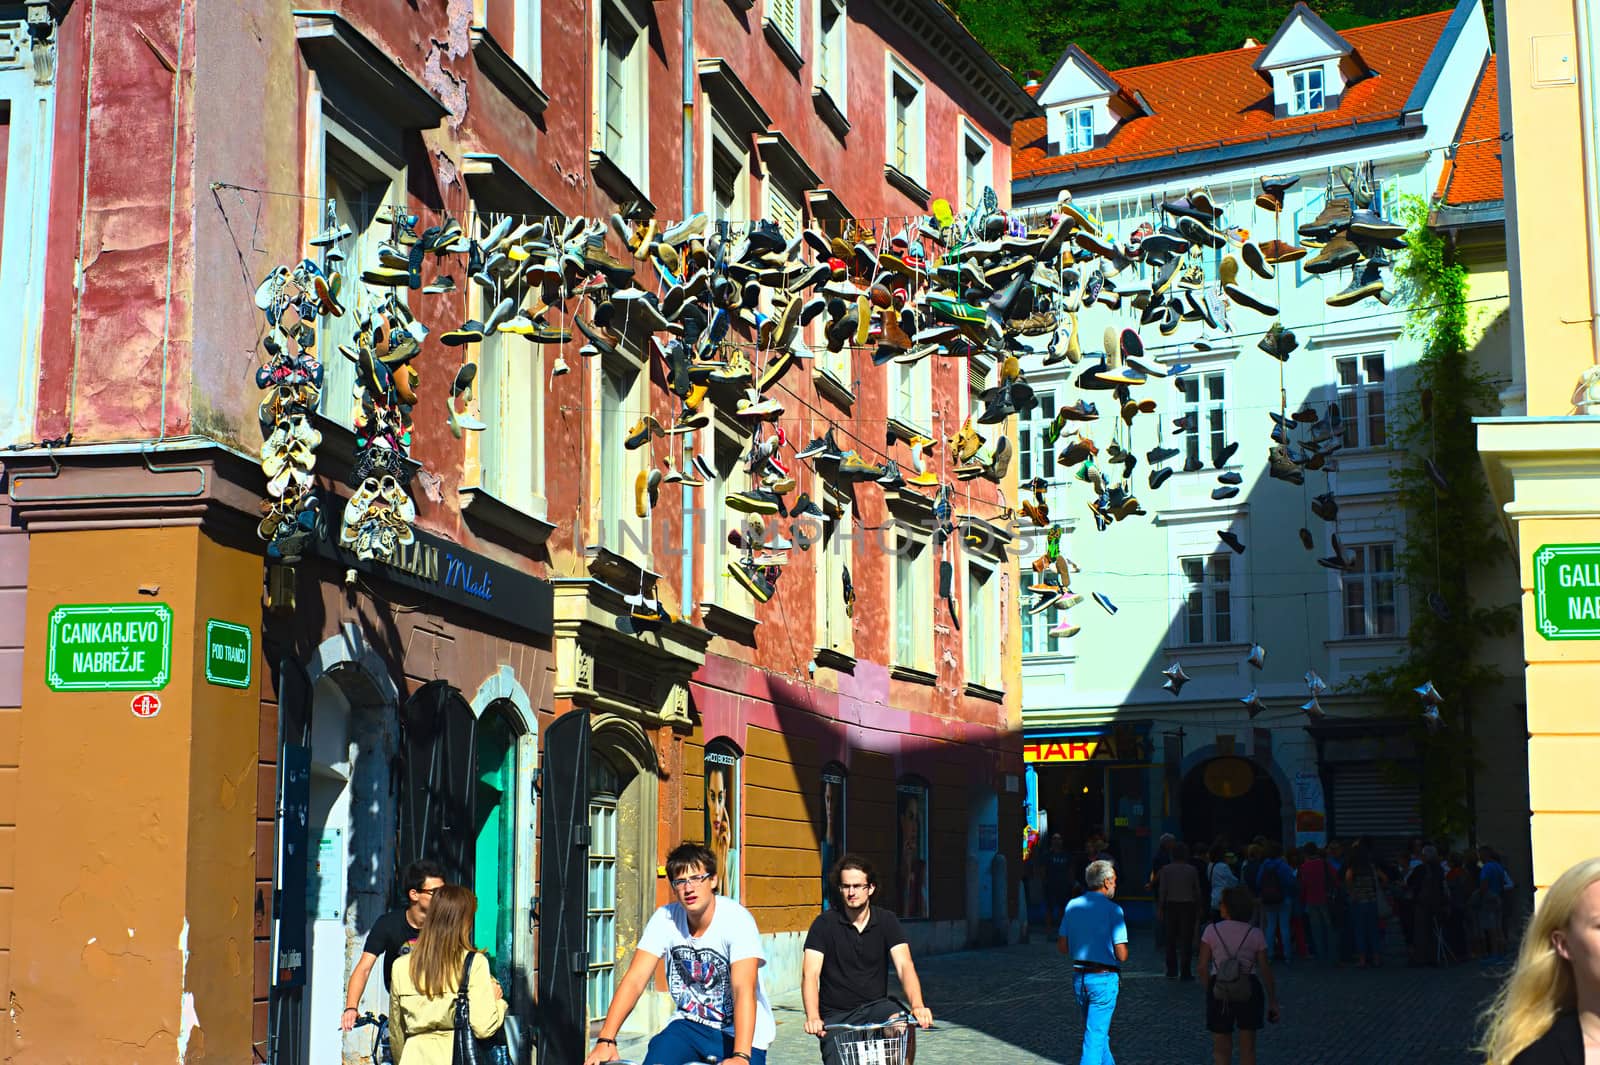 Shoes hanging in the Old Town of Ljubljana by joyfull